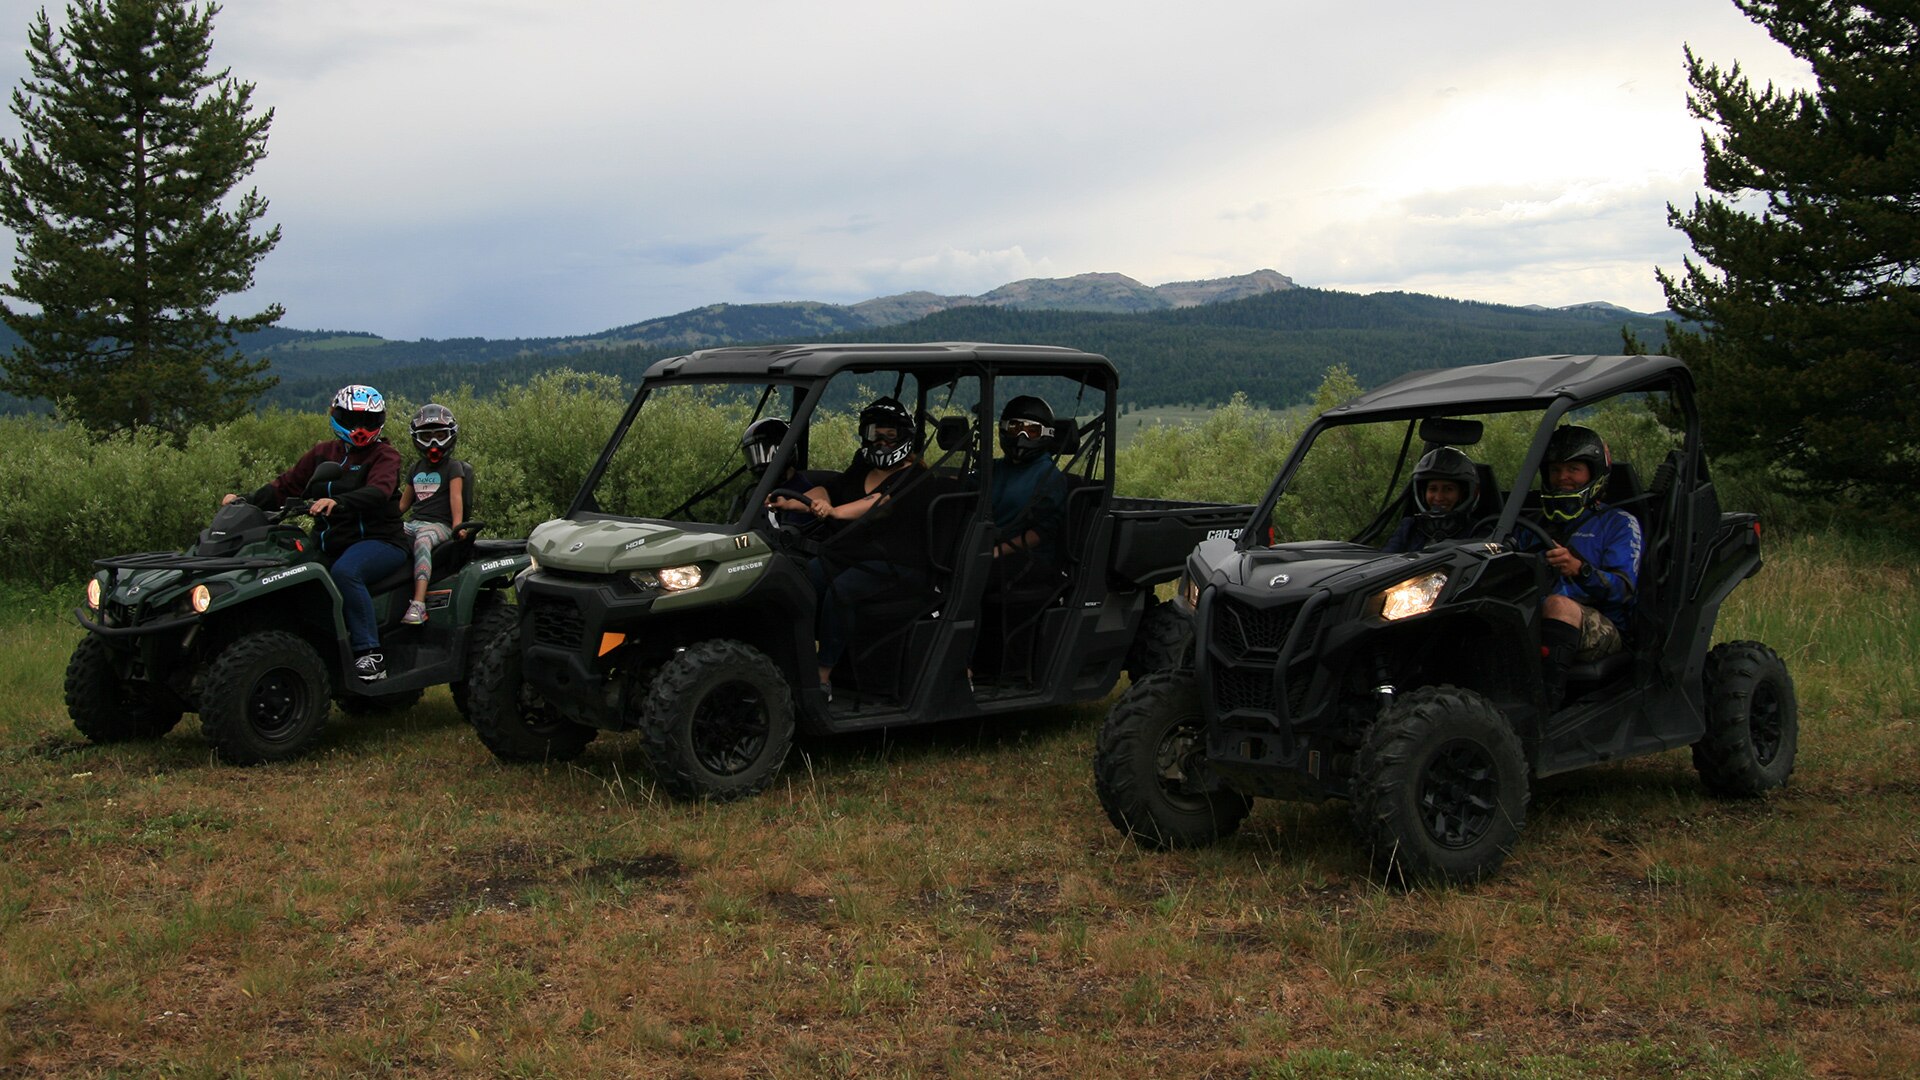 Can-Am riders and their vehicles